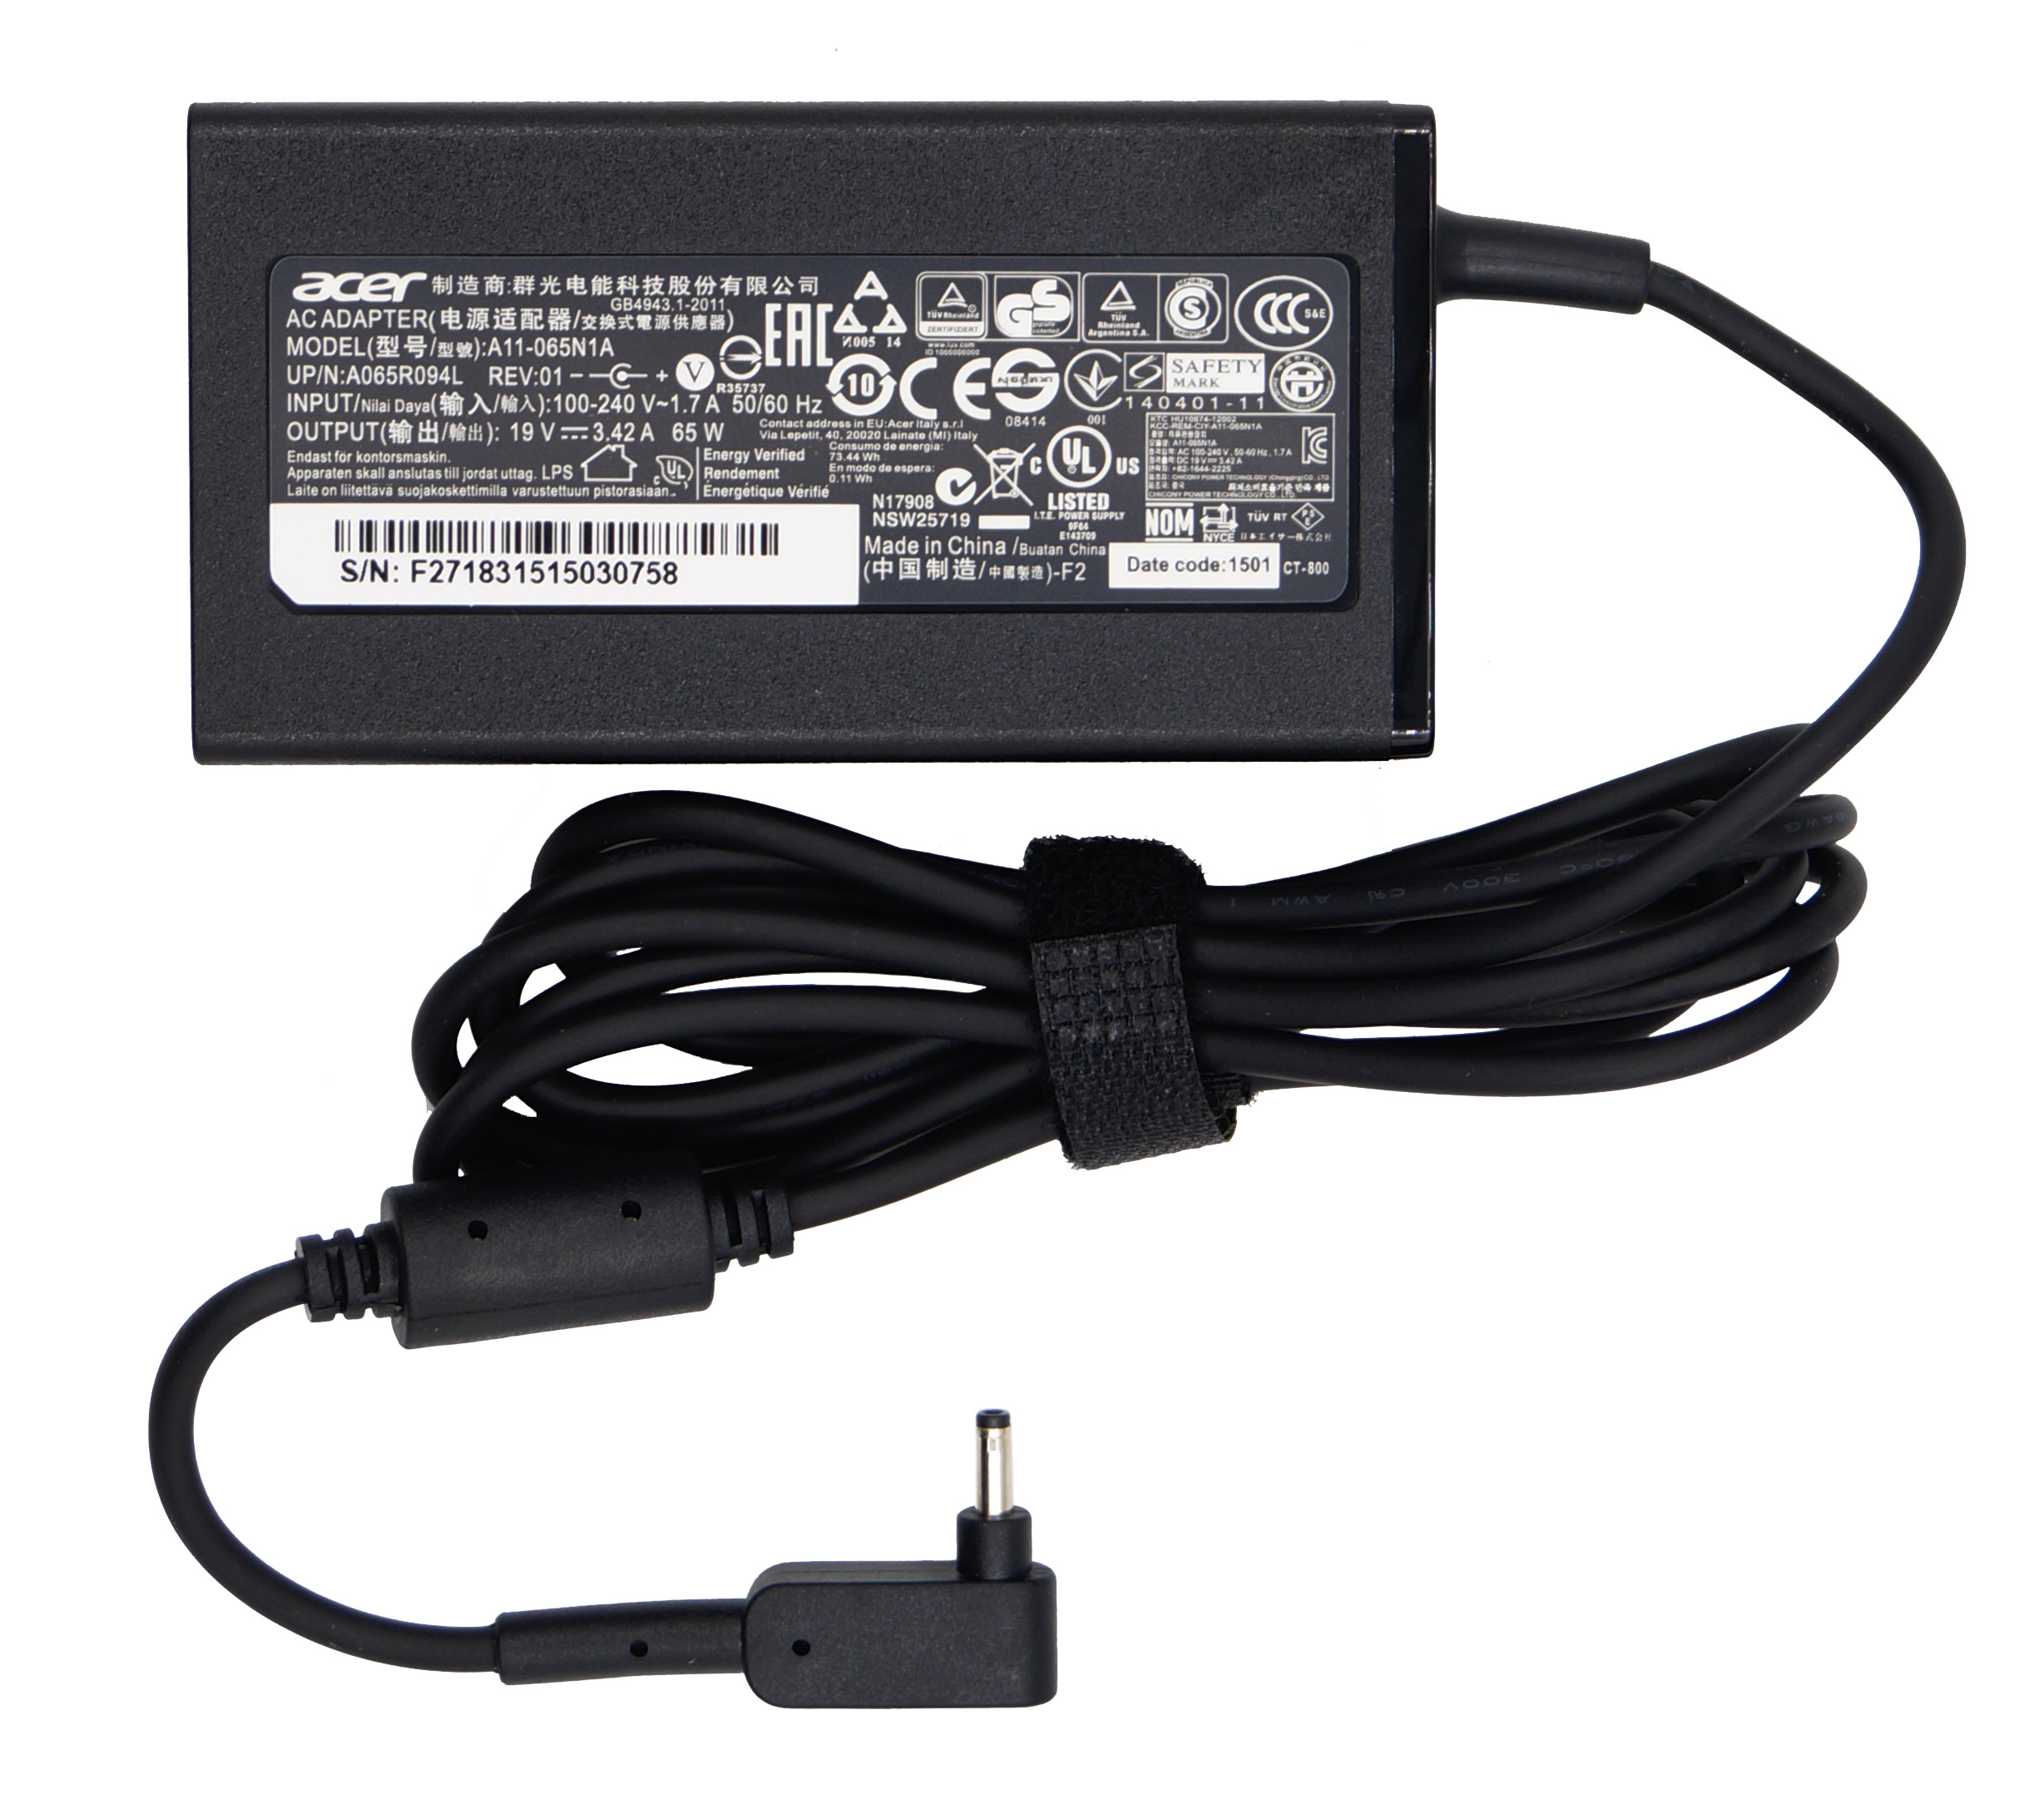   Acer 3.0x1.1, 65W (19V, 3.42A) ORG (new type)